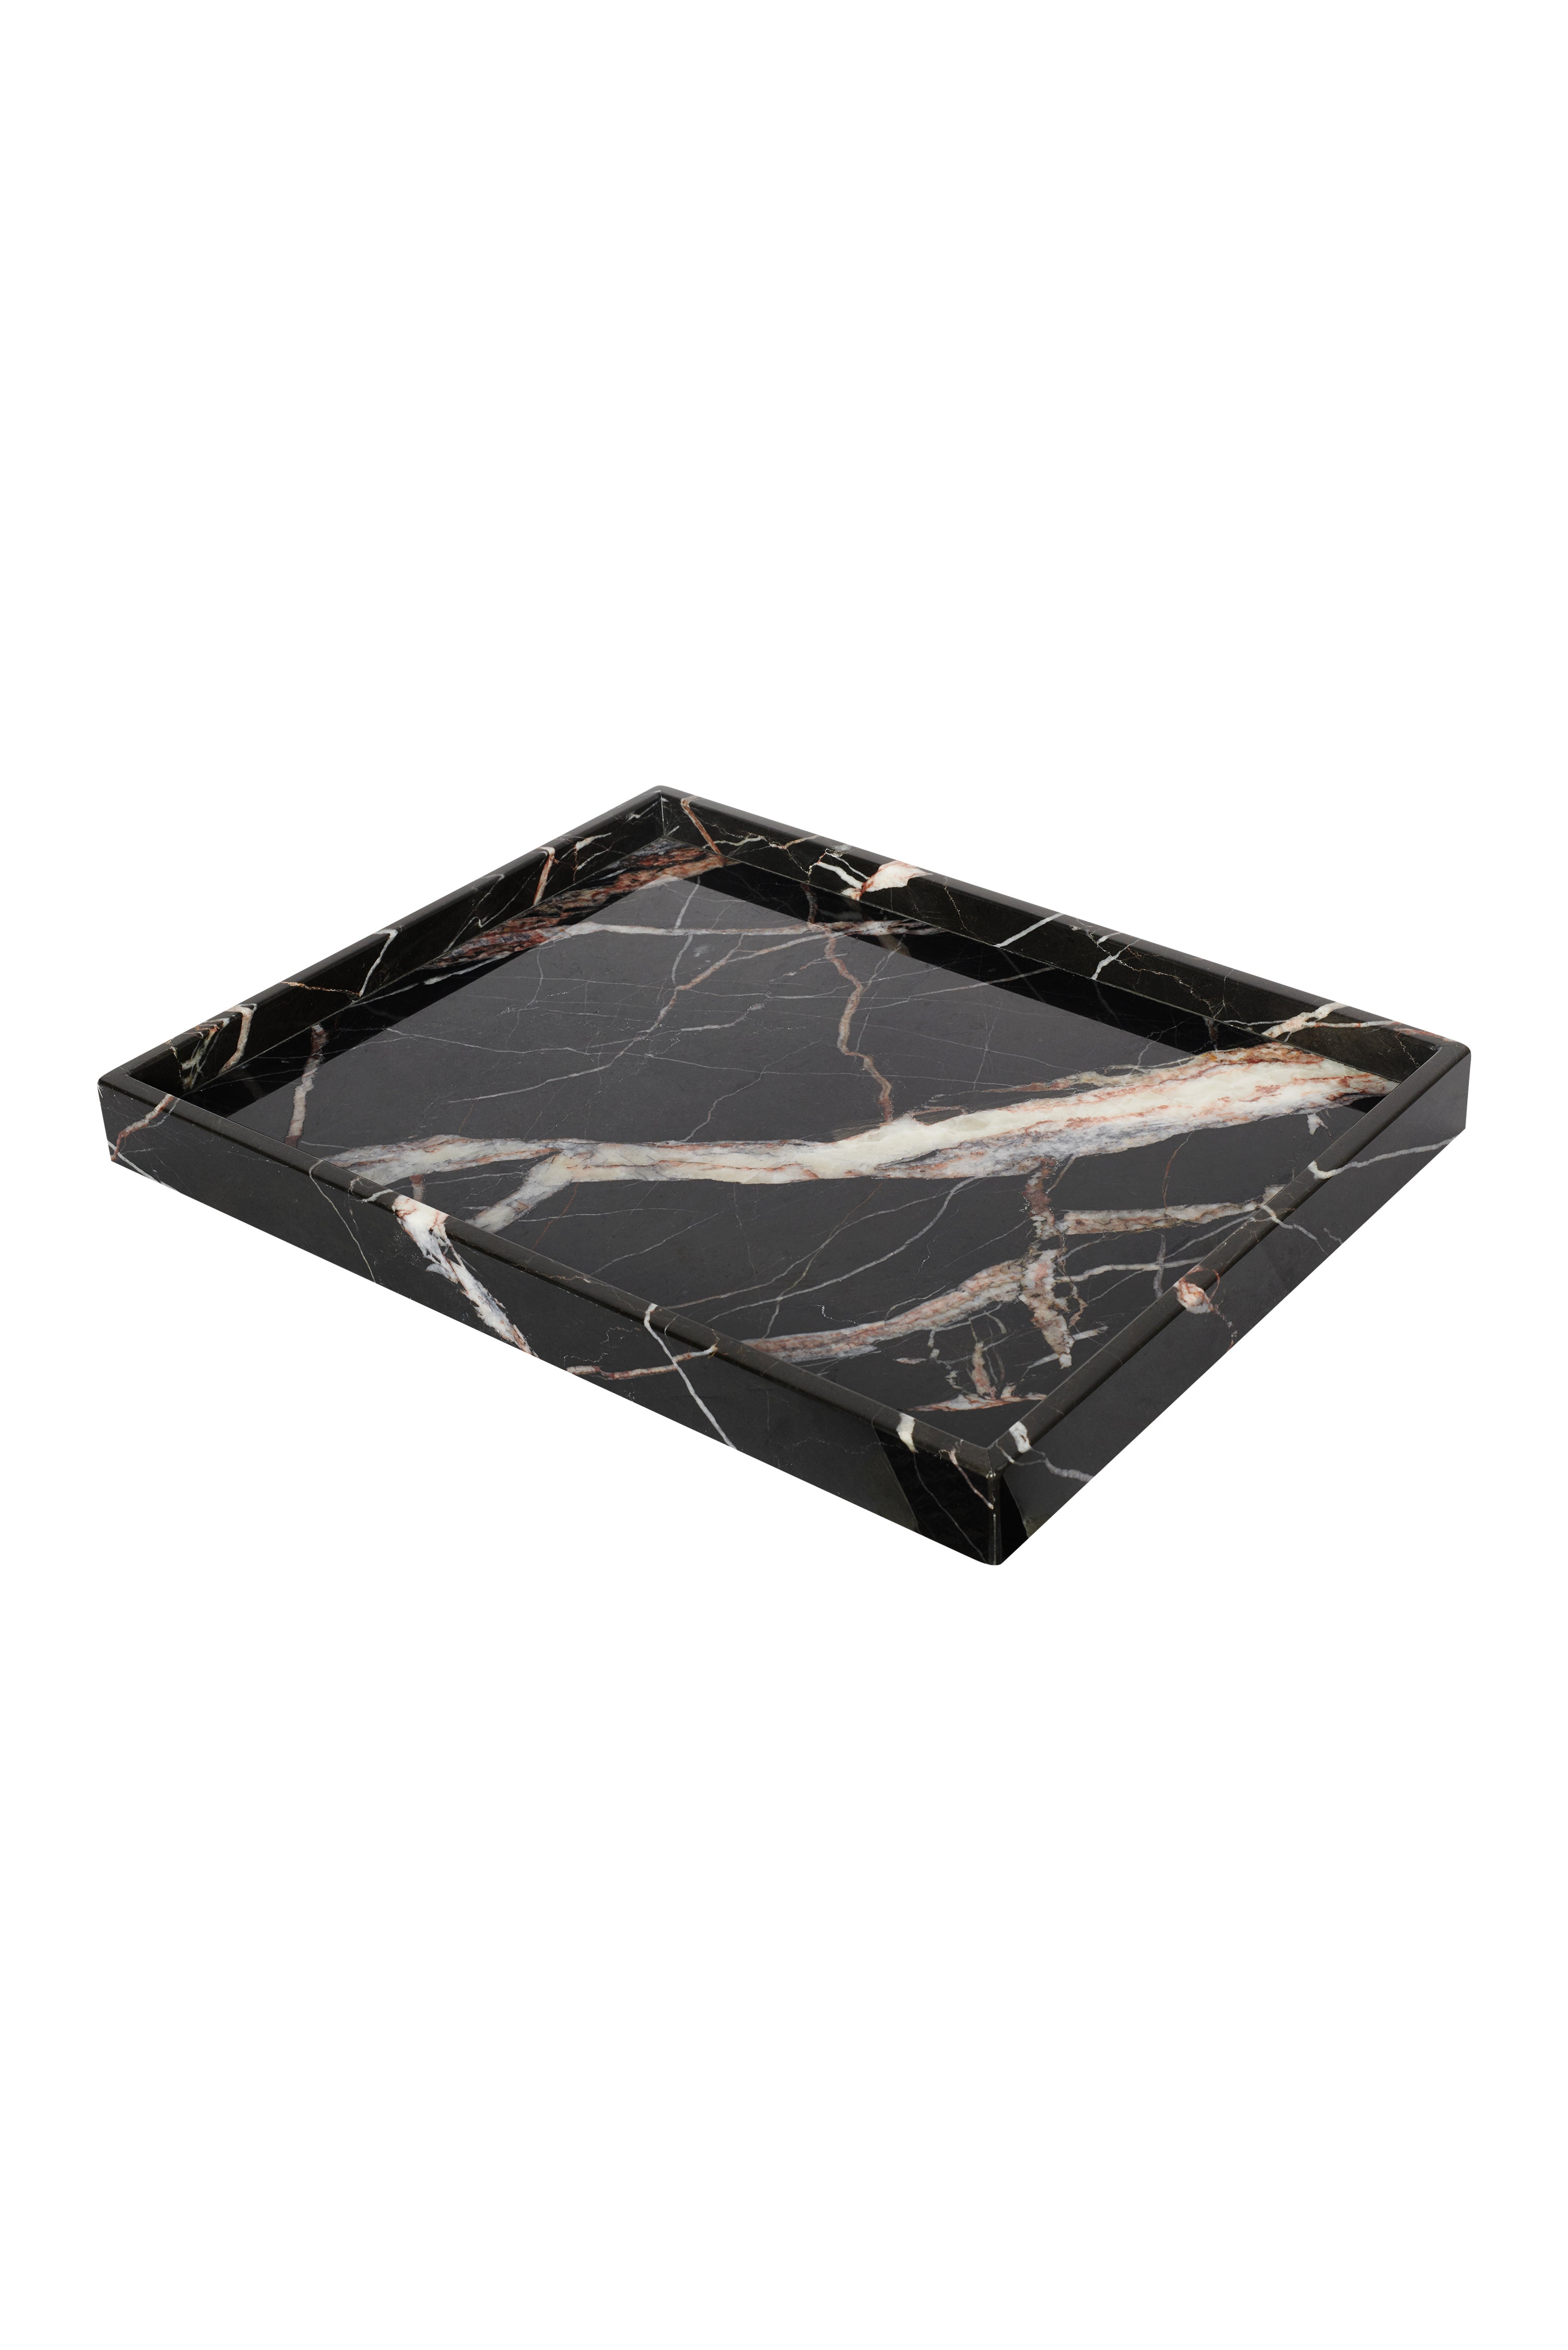 Giant Tray - PREORDER